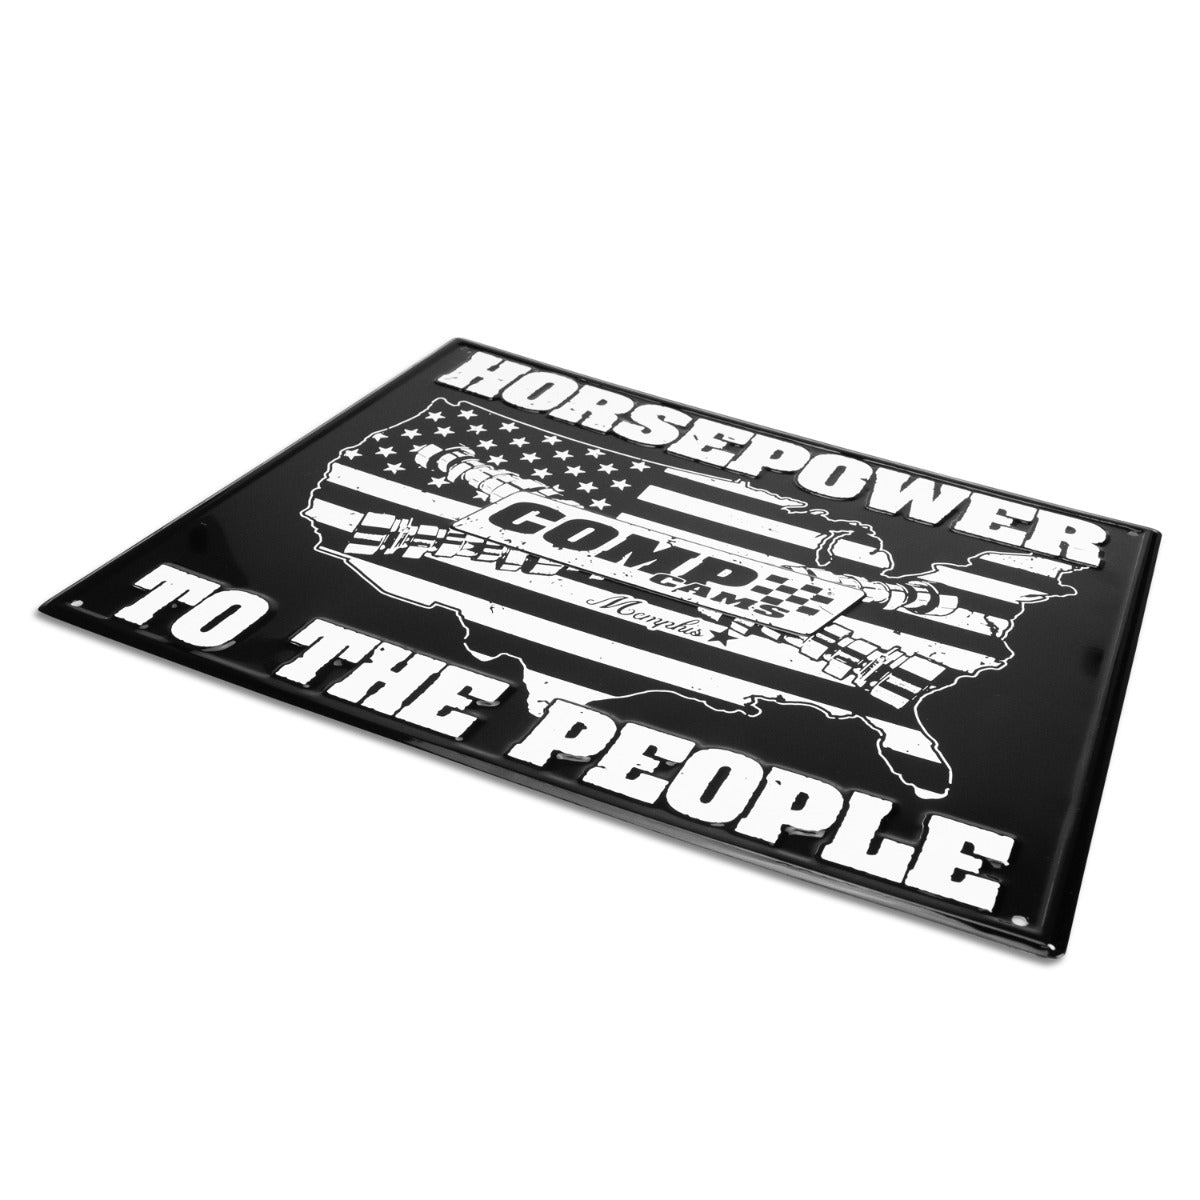 Competition Cams Horsepower To The People Black and White 16 inch x12 inch Tin Garage Sign COMP5-1043